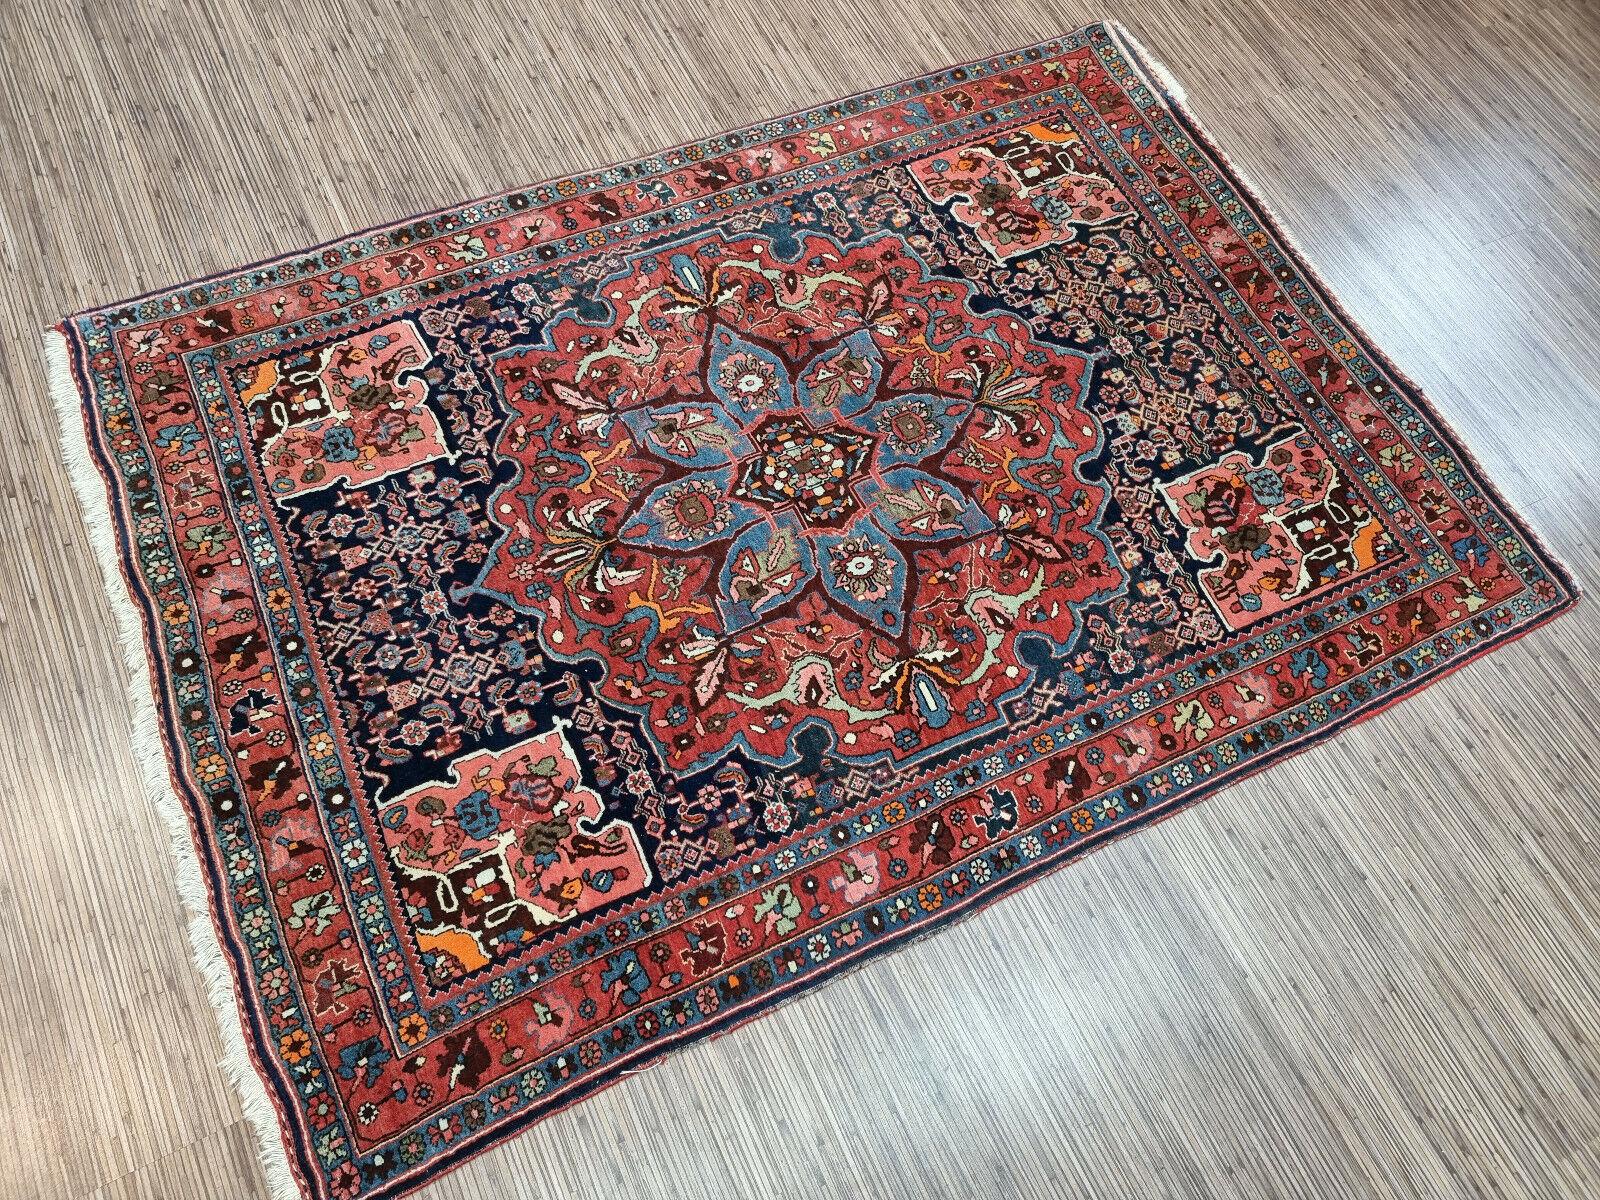 Handmade Antique Persian Style Bidjar Rug 3.8' x 5.3', 1910s - 1D100 In Good Condition For Sale In Bordeaux, FR